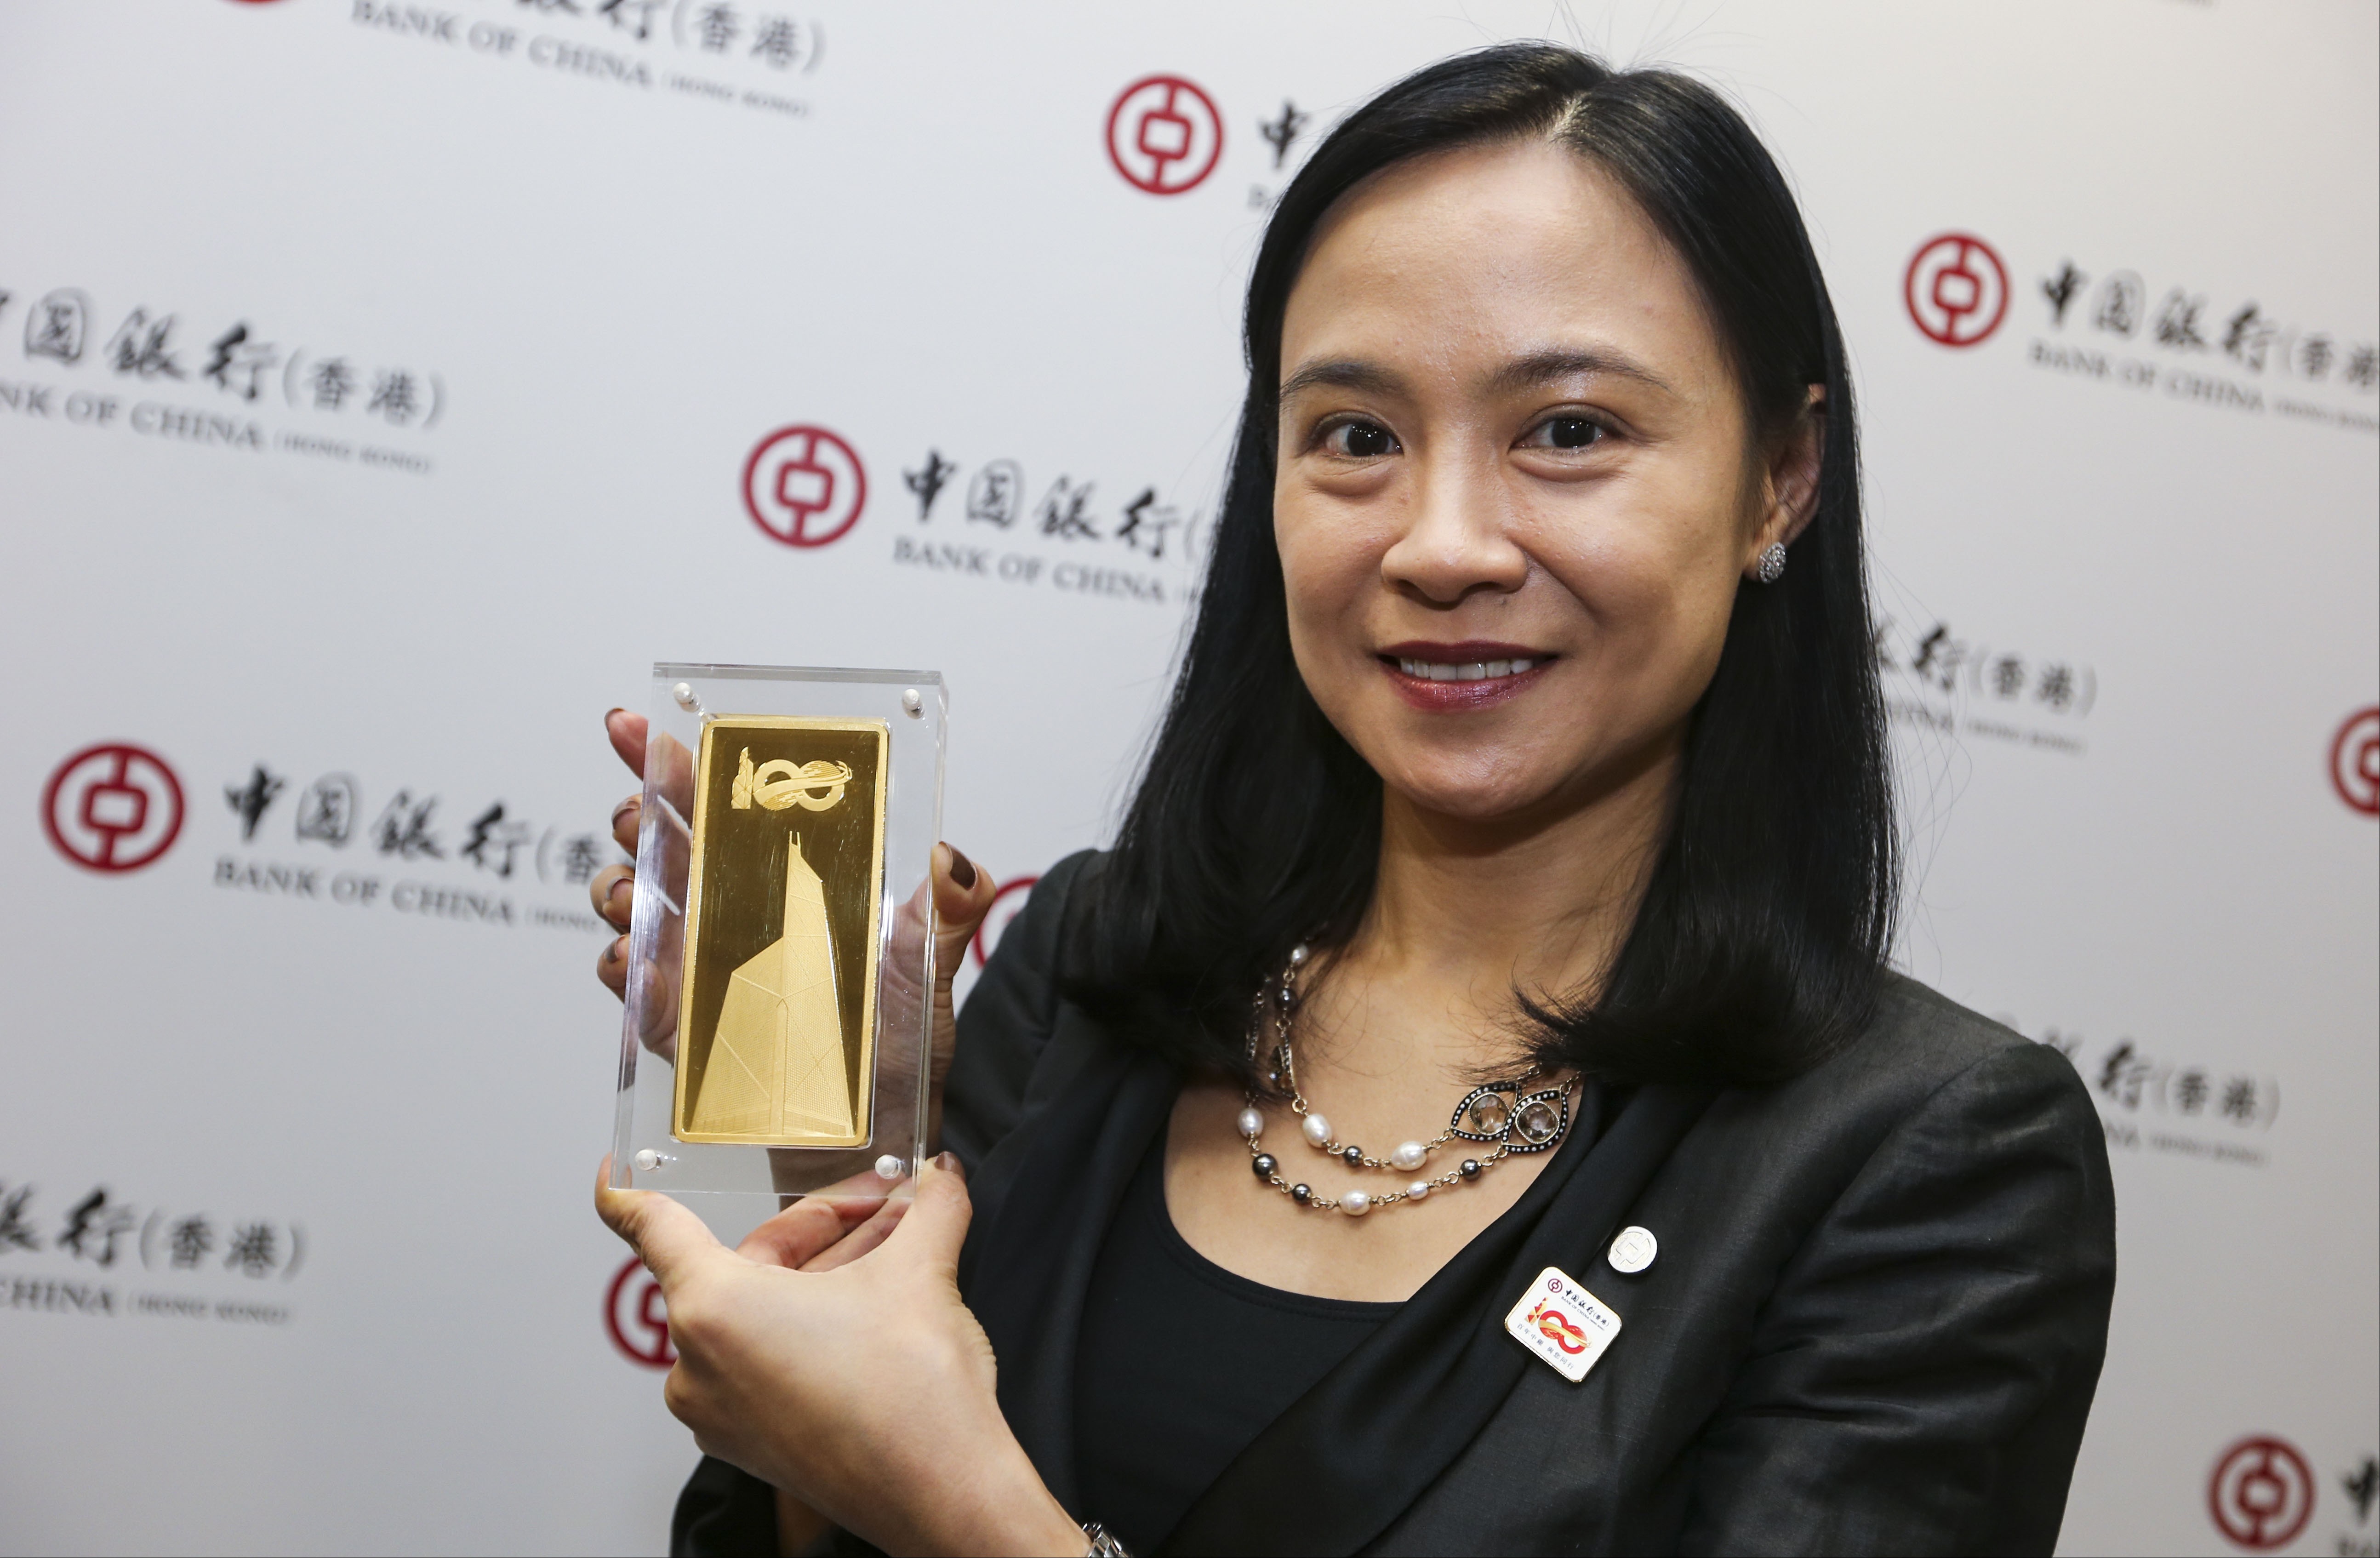 The distinctive image of the Bank of China Tower engraved on the commemorative 1kilo gold bars, being shown here by the bank’s head of treasury product division Winnie Cheung Wing-sze, to mark its 100th anniversary in Hong Kong. The bars are being produced by Swiss gold refiner PAMP, part of MKS PampGroup, and will go on sale from next month. Photo: David Wong